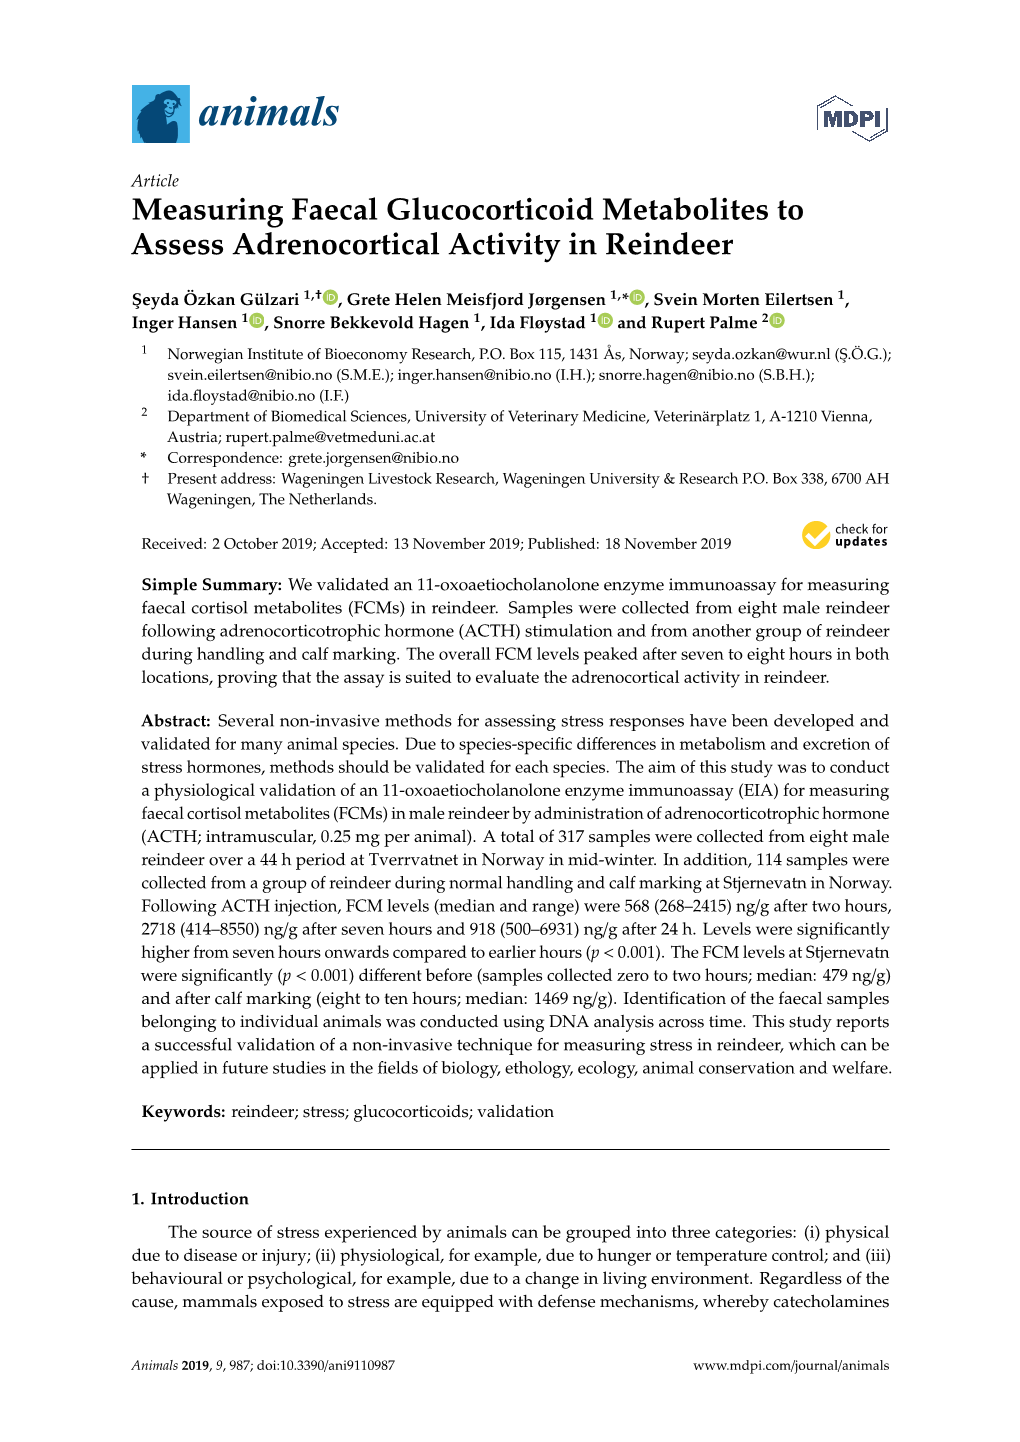 Measuring Faecal Glucocorticoid Metabolites to Assess Adrenocortical Activity in Reindeer